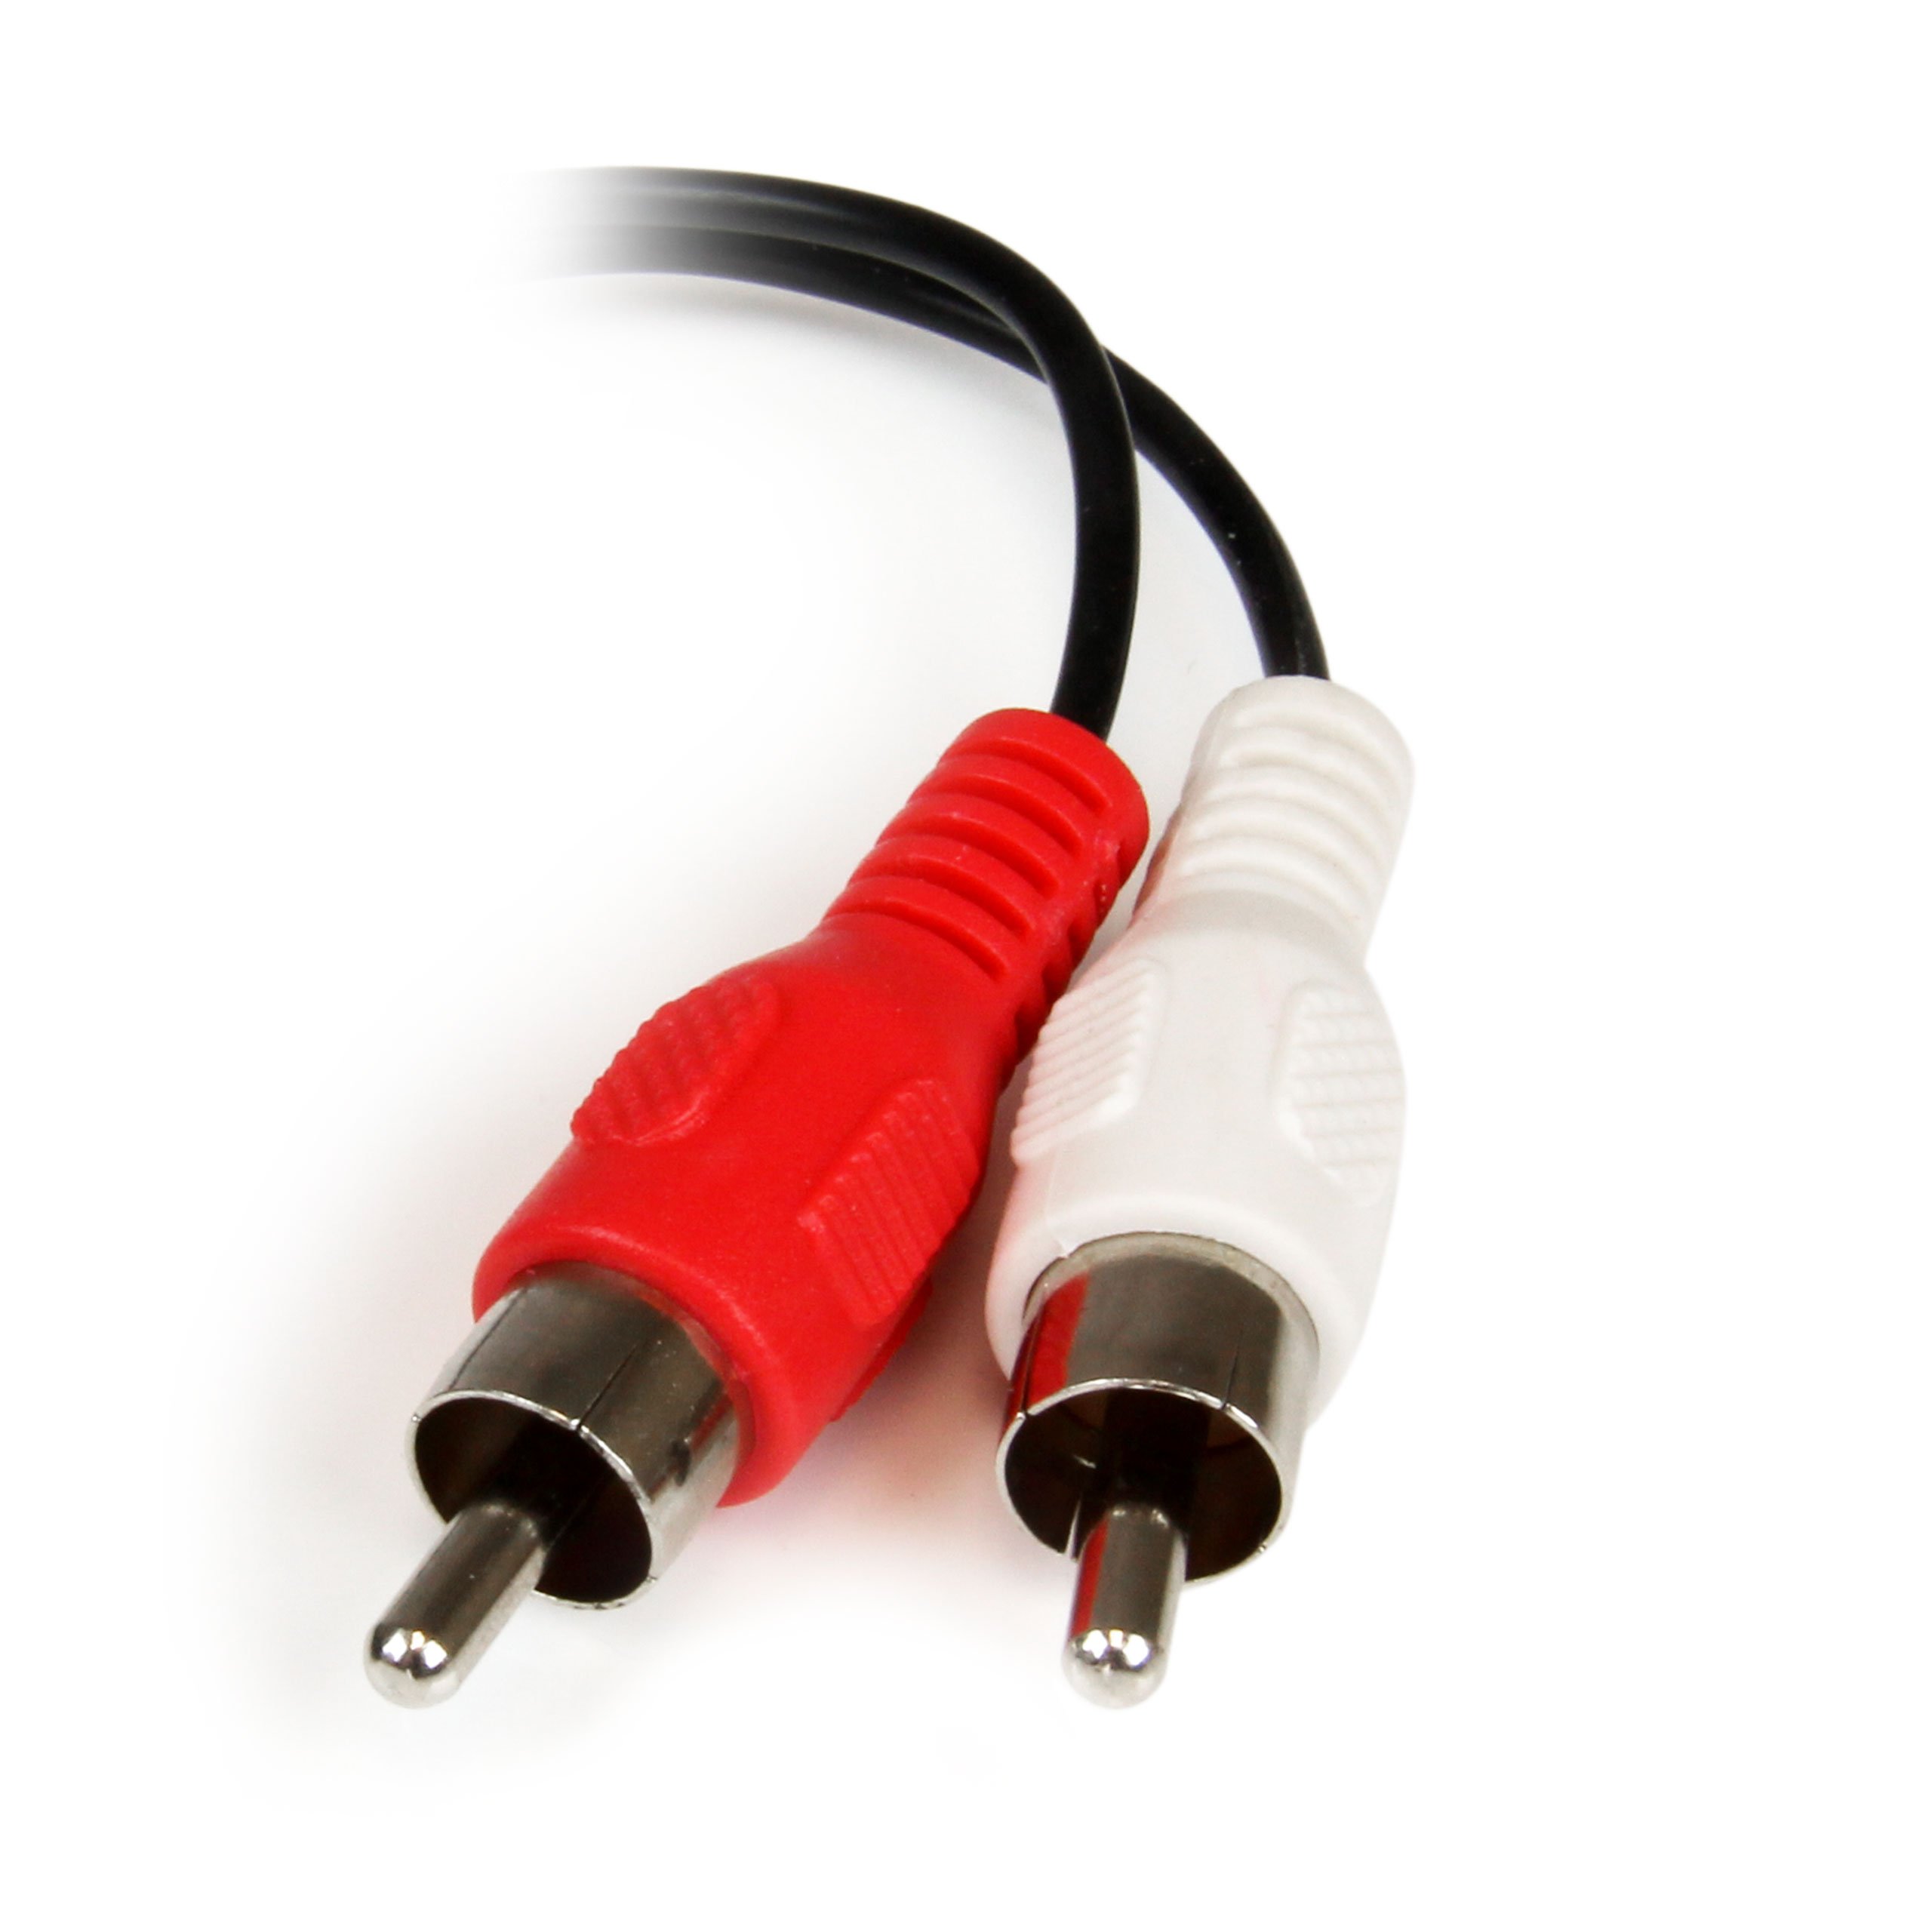 StarTech.com 6in RCA to 3.5mm Female Cable - Audio to RCA Cable - 3.5mm Female to 2x RCA Male - Aux to RCA - Stereo Audio Cable (MUFMRCA)